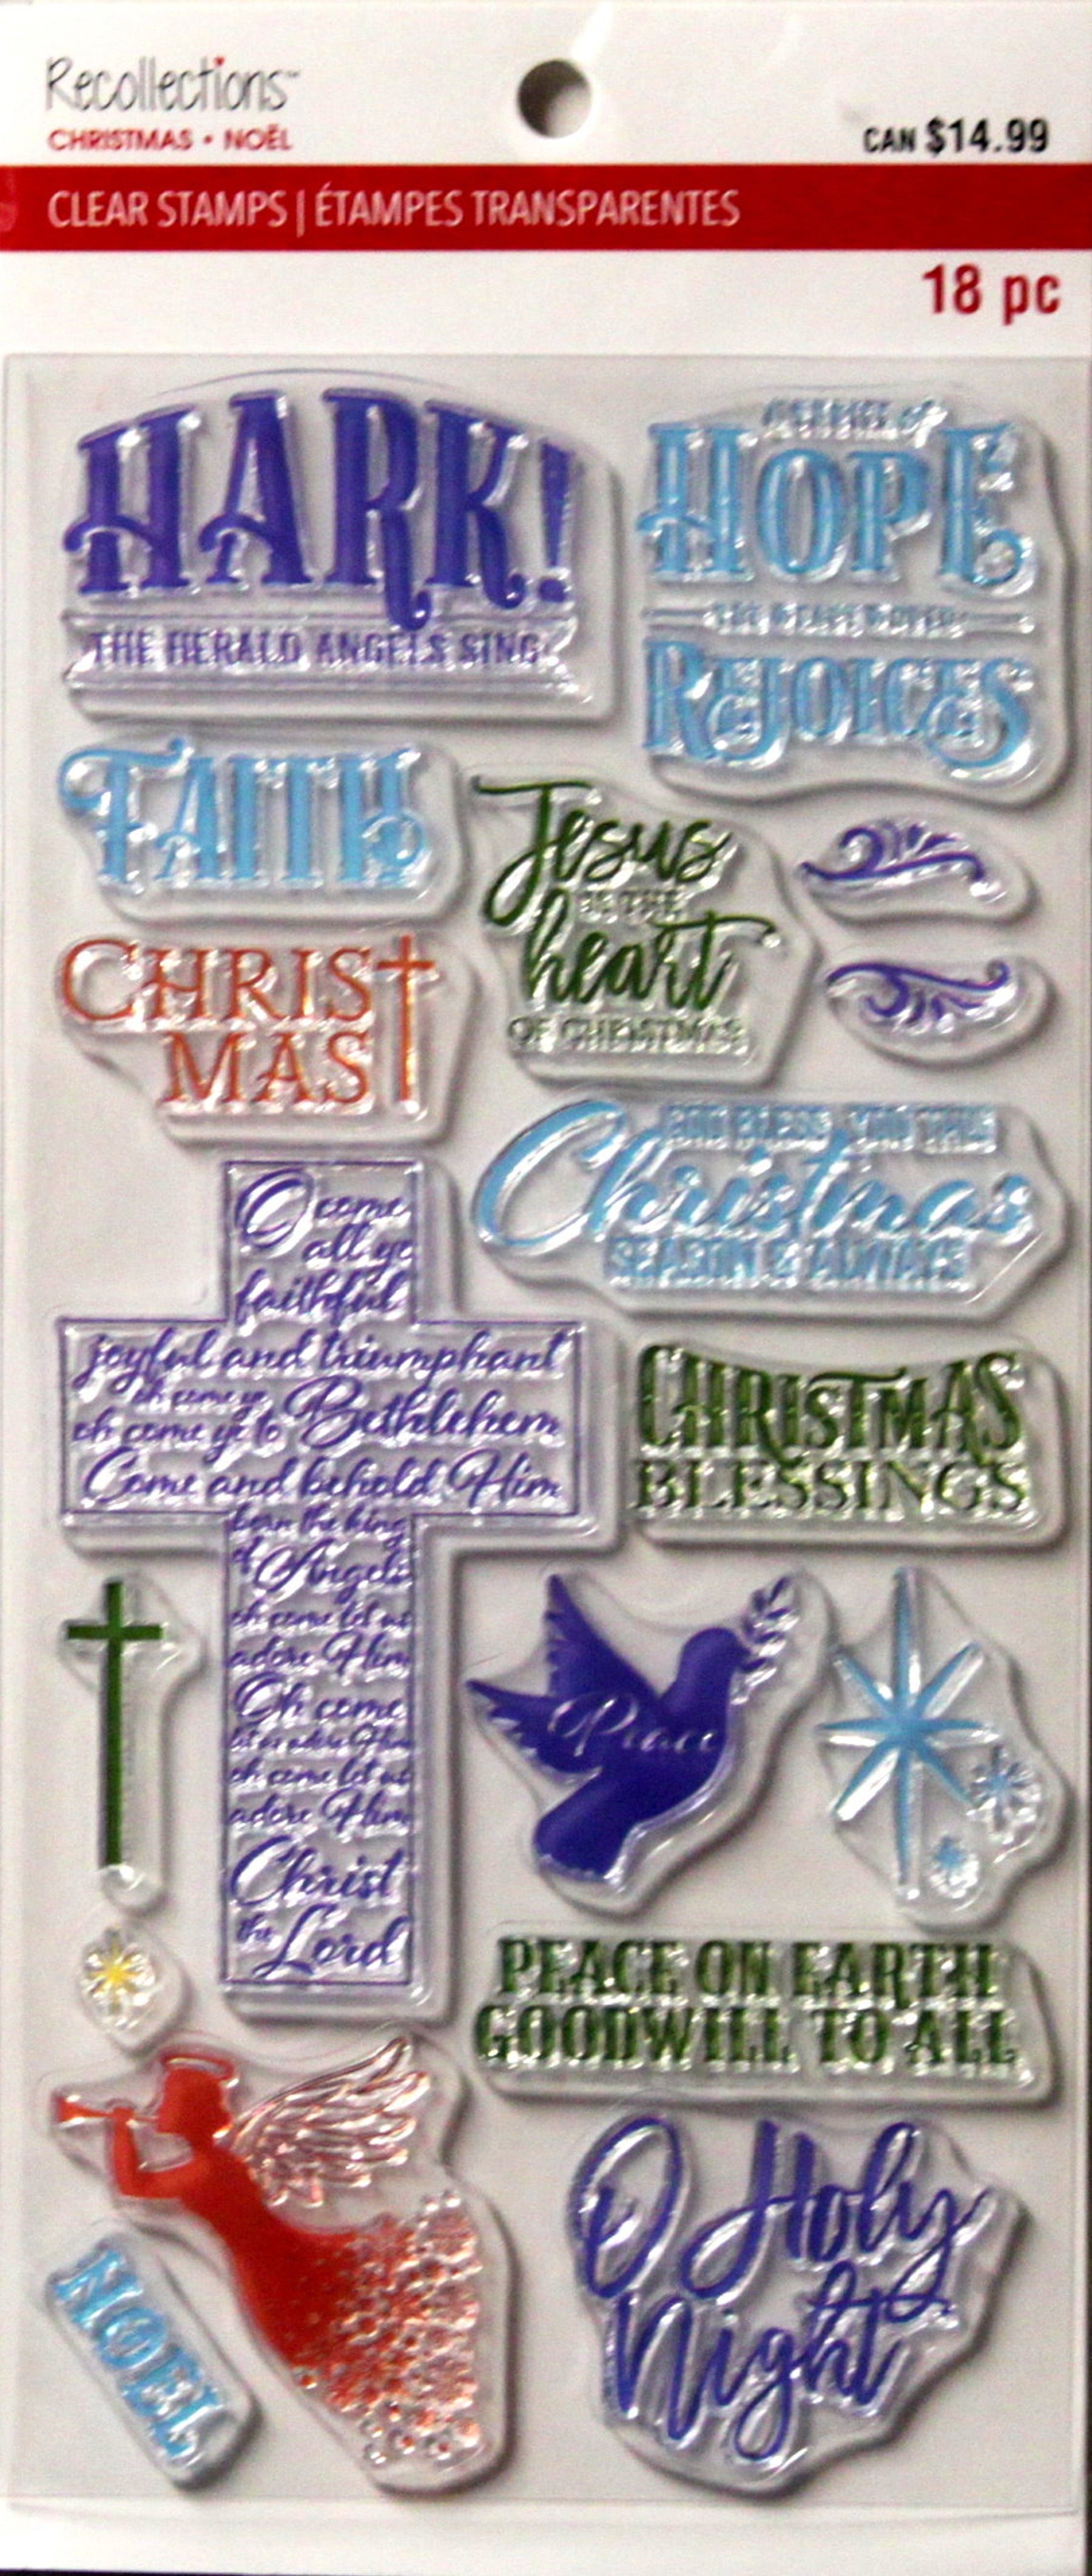 Recollections Christmas Noel Religious Sentiments & Icons Clear Stamps Collection